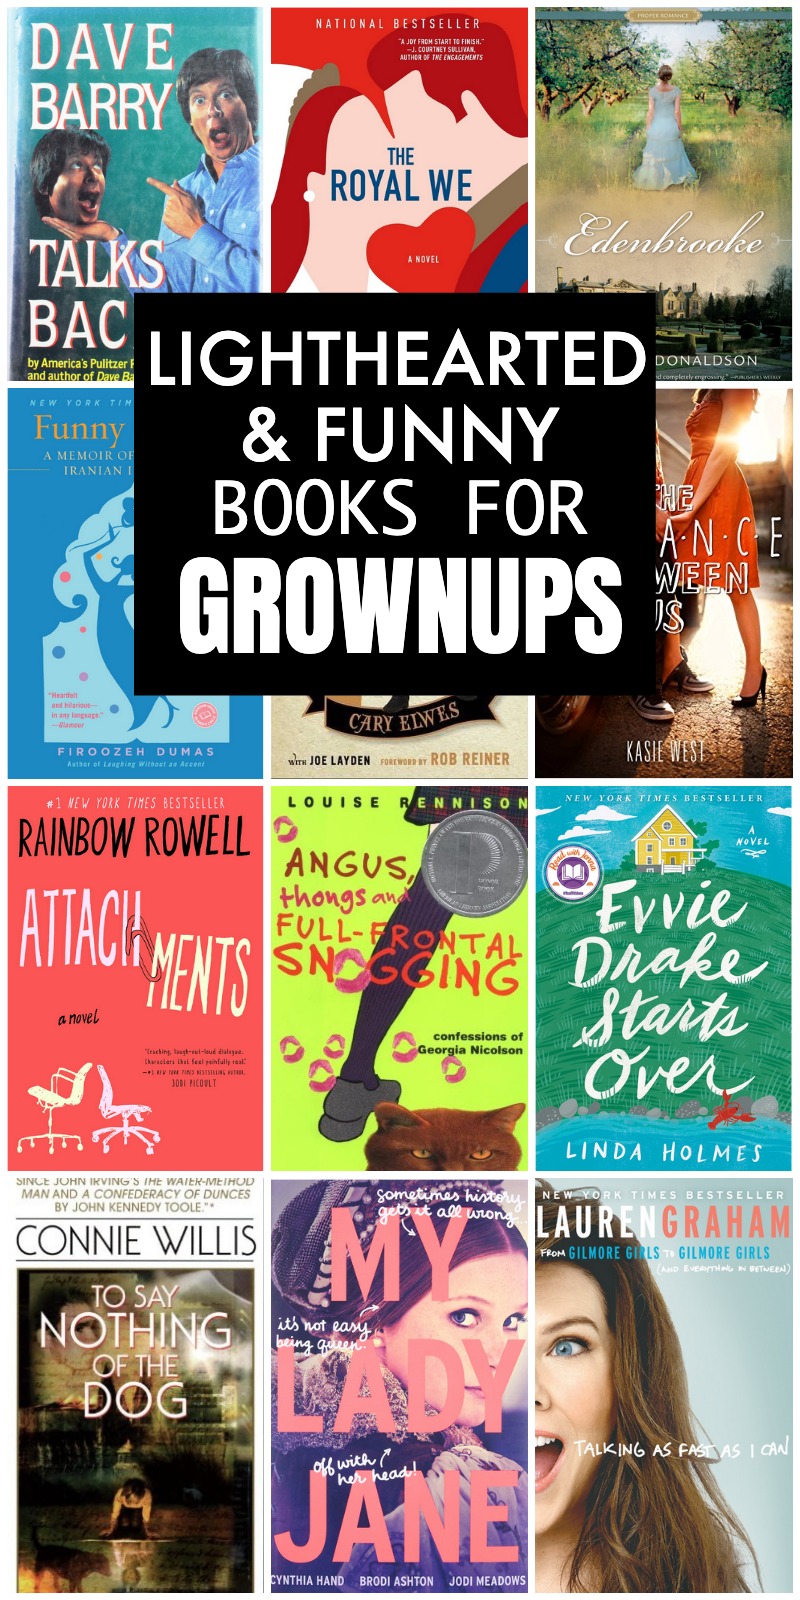 17 Lighthearted and Funny Books for Grownups - Everyday Reading